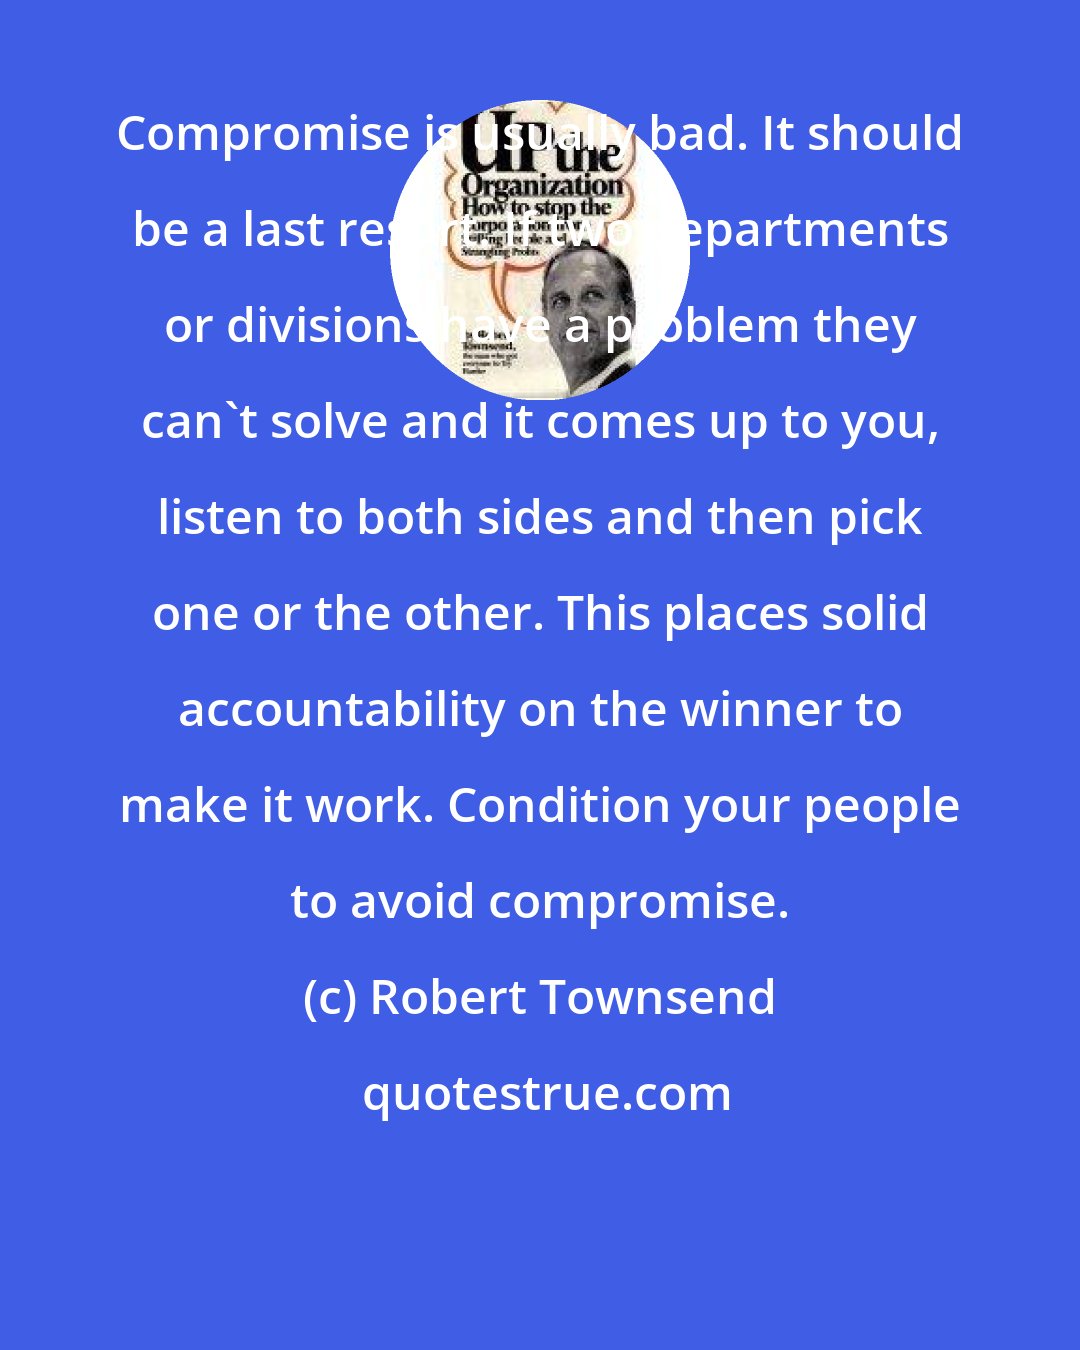 Robert Townsend: Compromise is usually bad. It should be a last resort. If two departments or divisions have a problem they can't solve and it comes up to you, listen to both sides and then pick one or the other. This places solid accountability on the winner to make it work. Condition your people to avoid compromise.